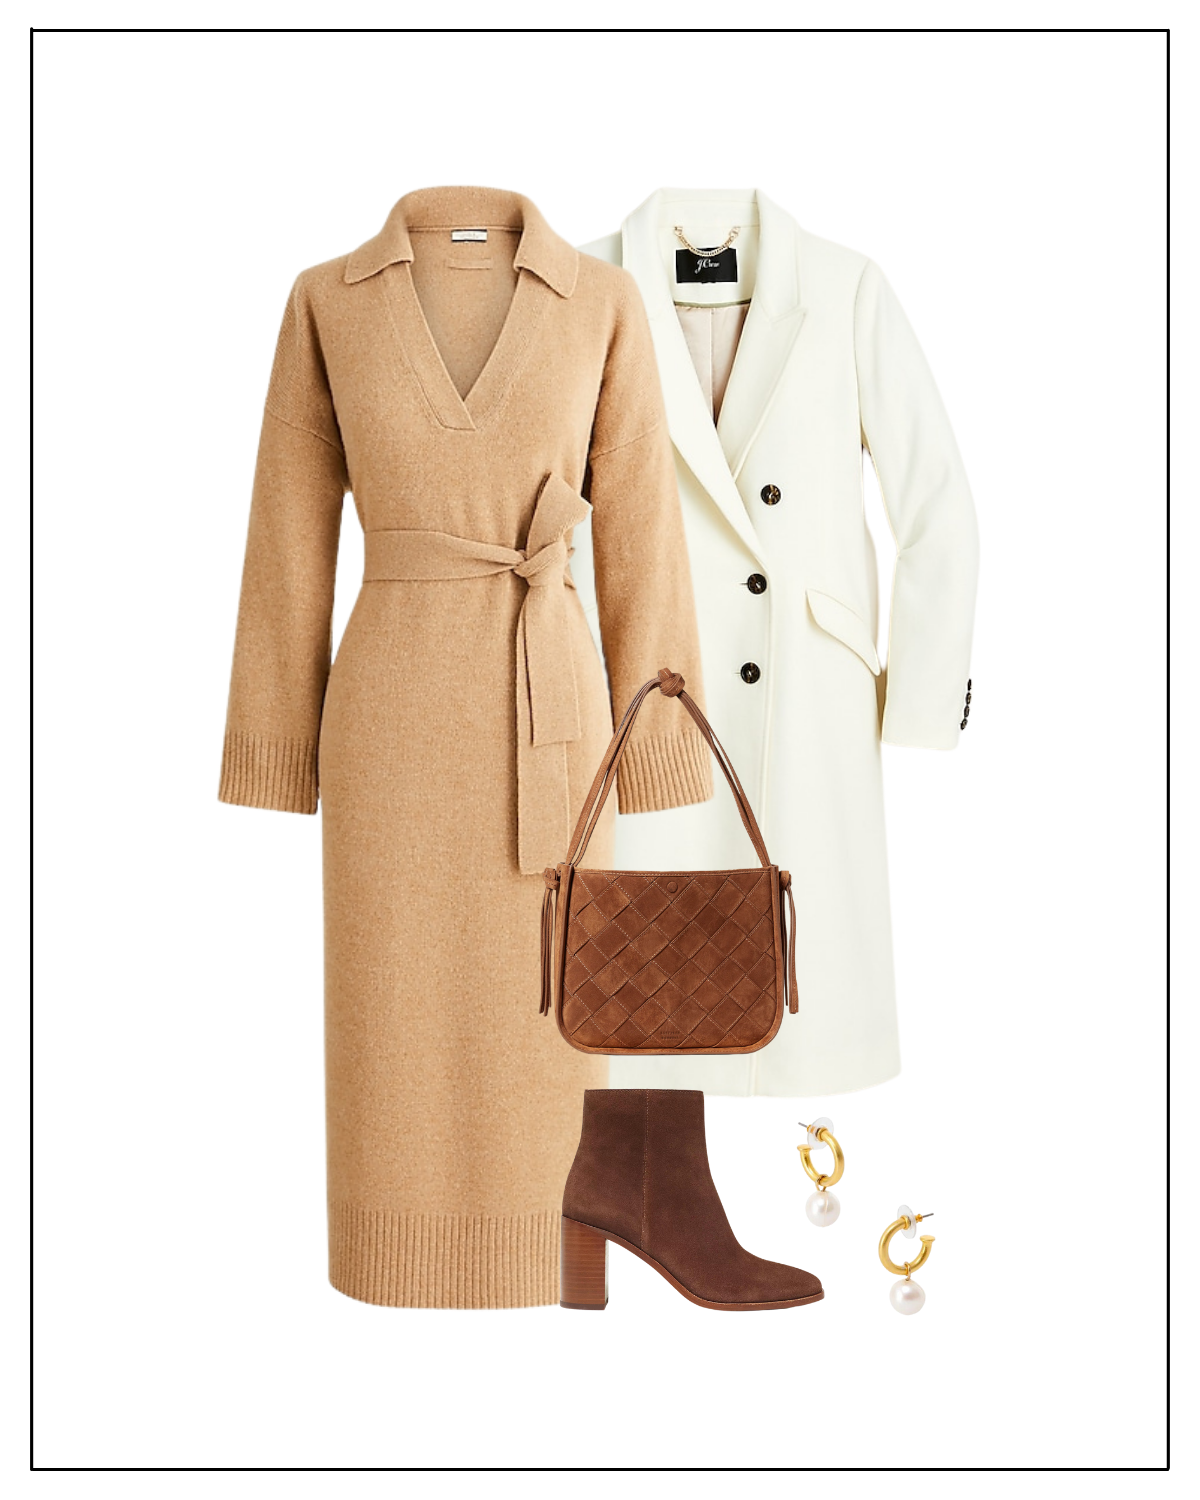 How to Wear Dresses in Winter - Cashmere Tie Dress